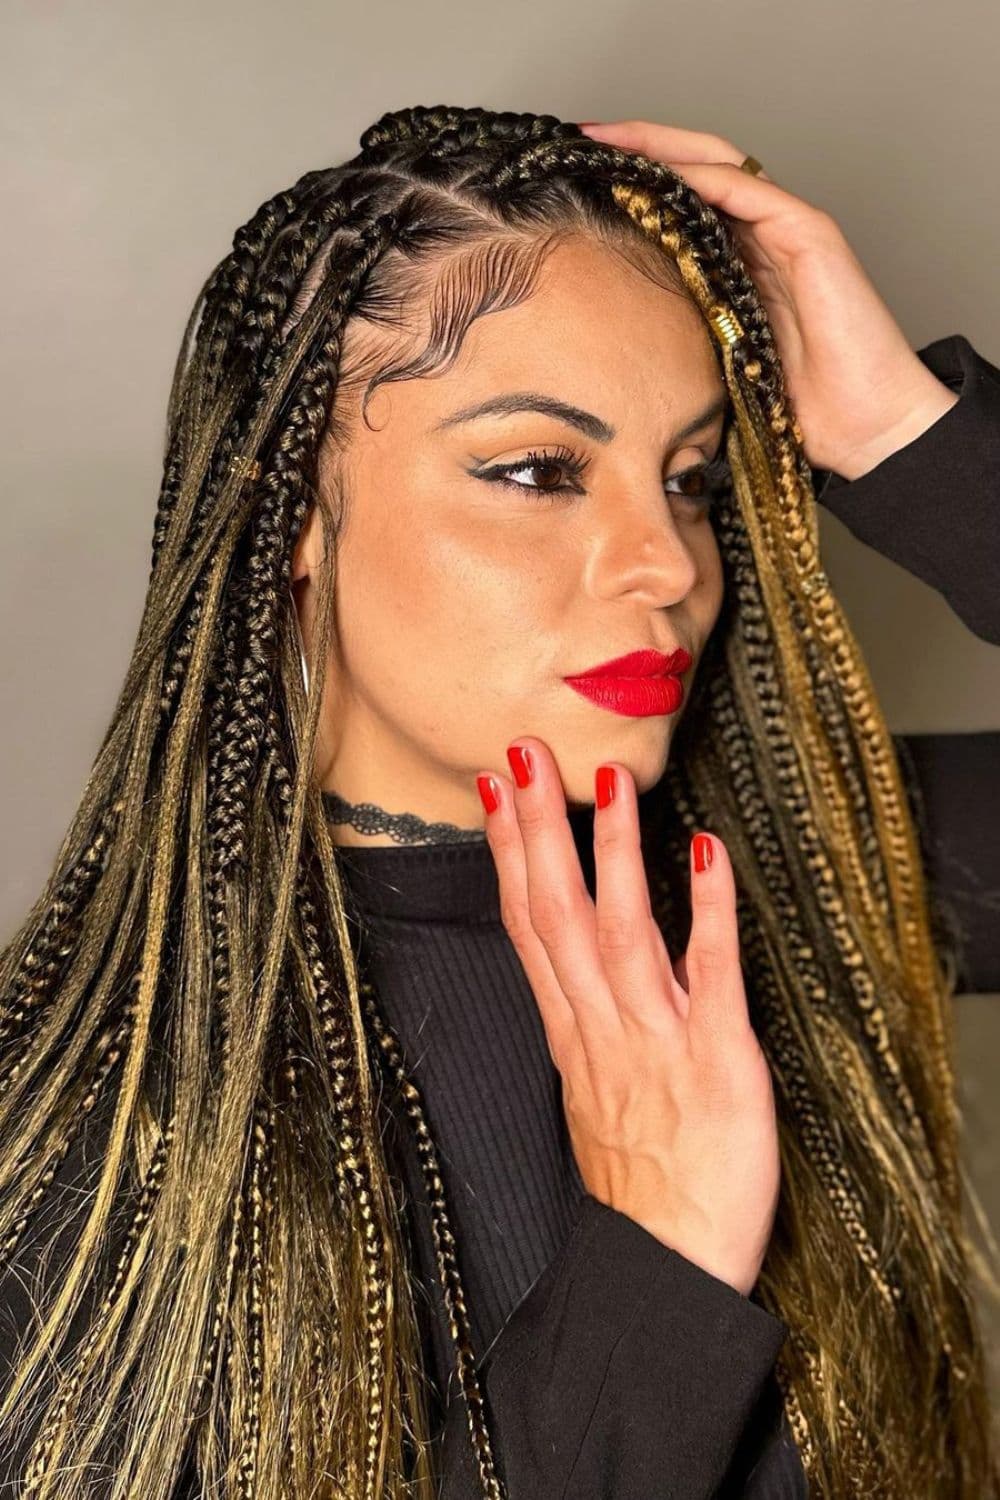 A woman with side-parted goddess braids.